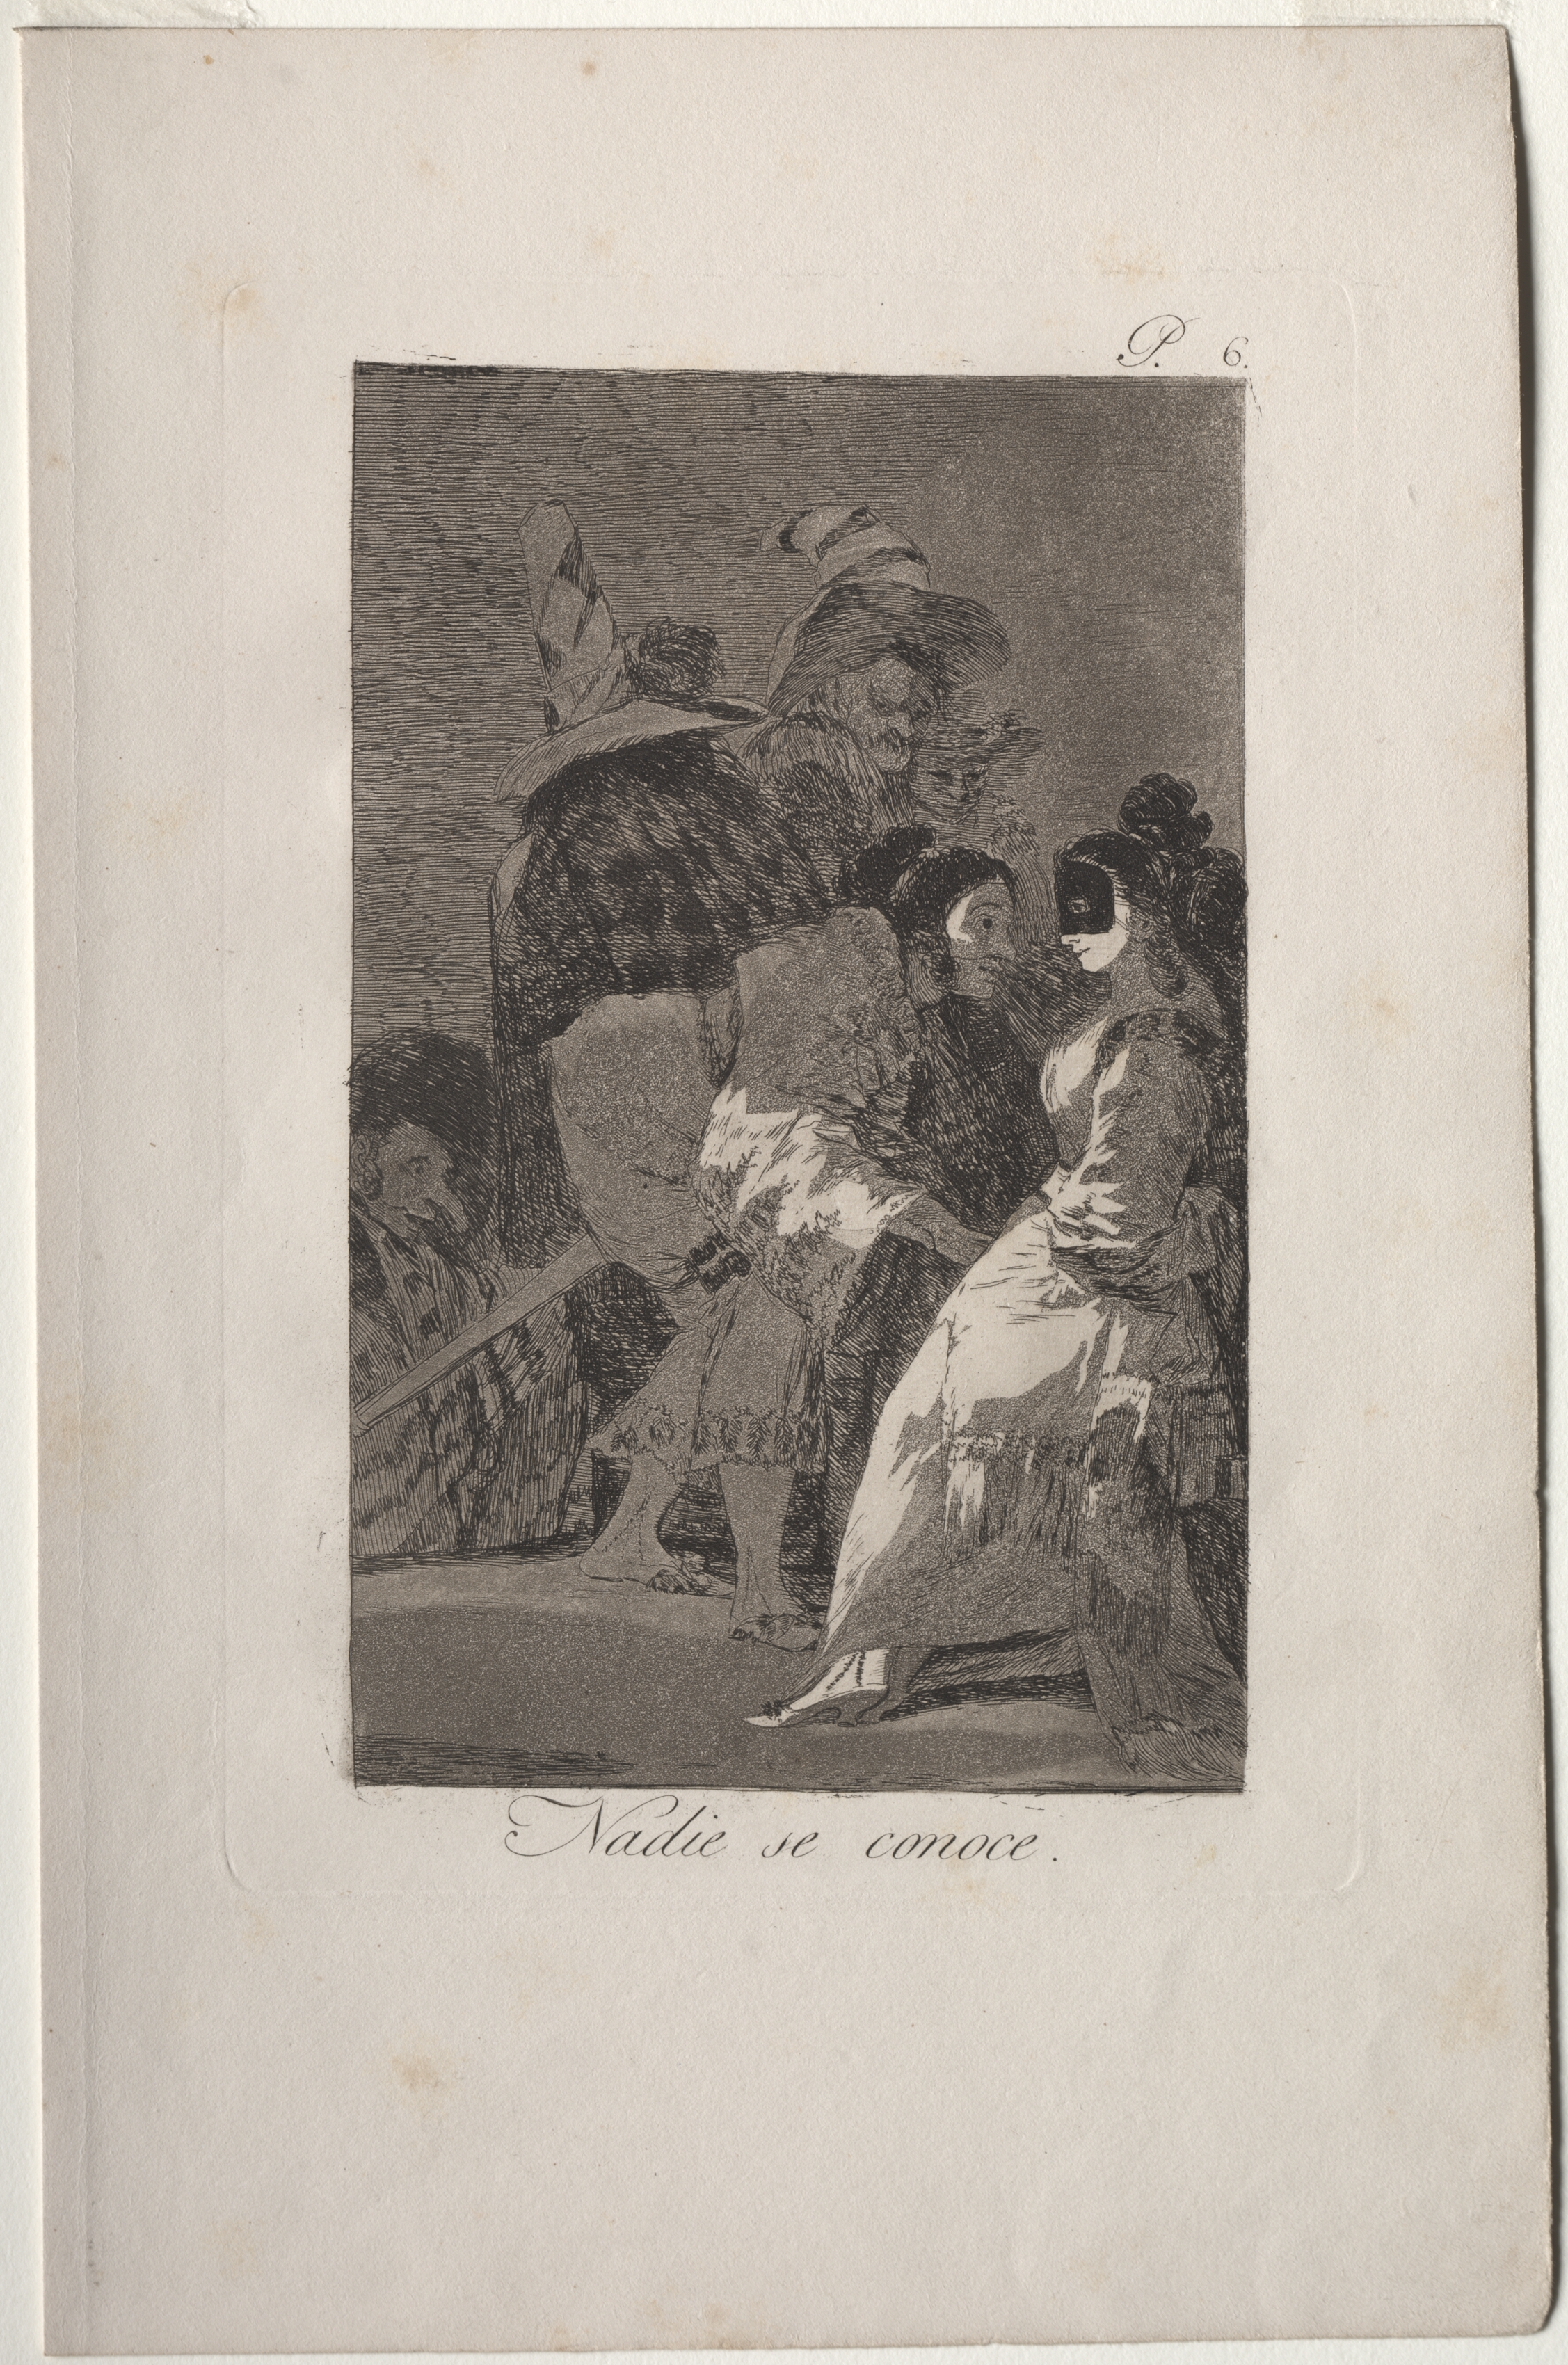 No One Knows Himself, Plate 6